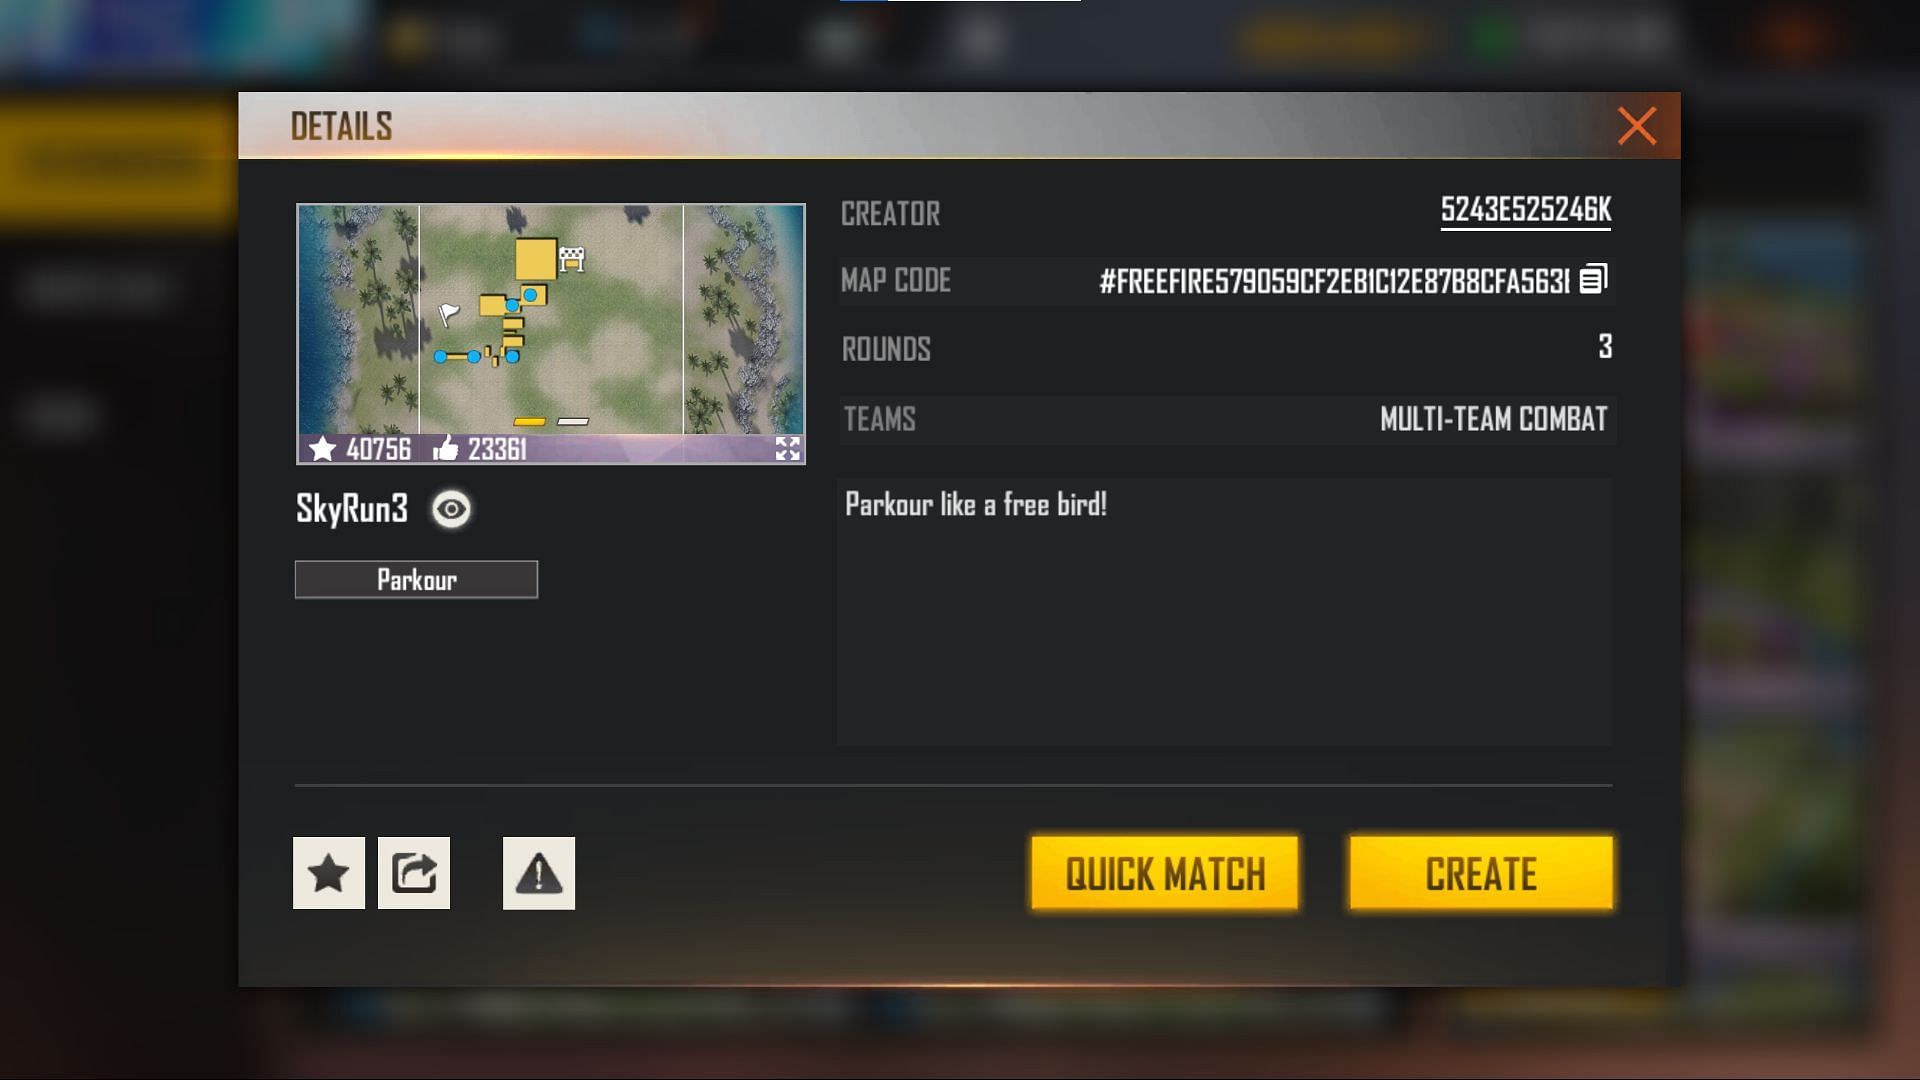 Users can enter the matchmaking and enjoy playing it